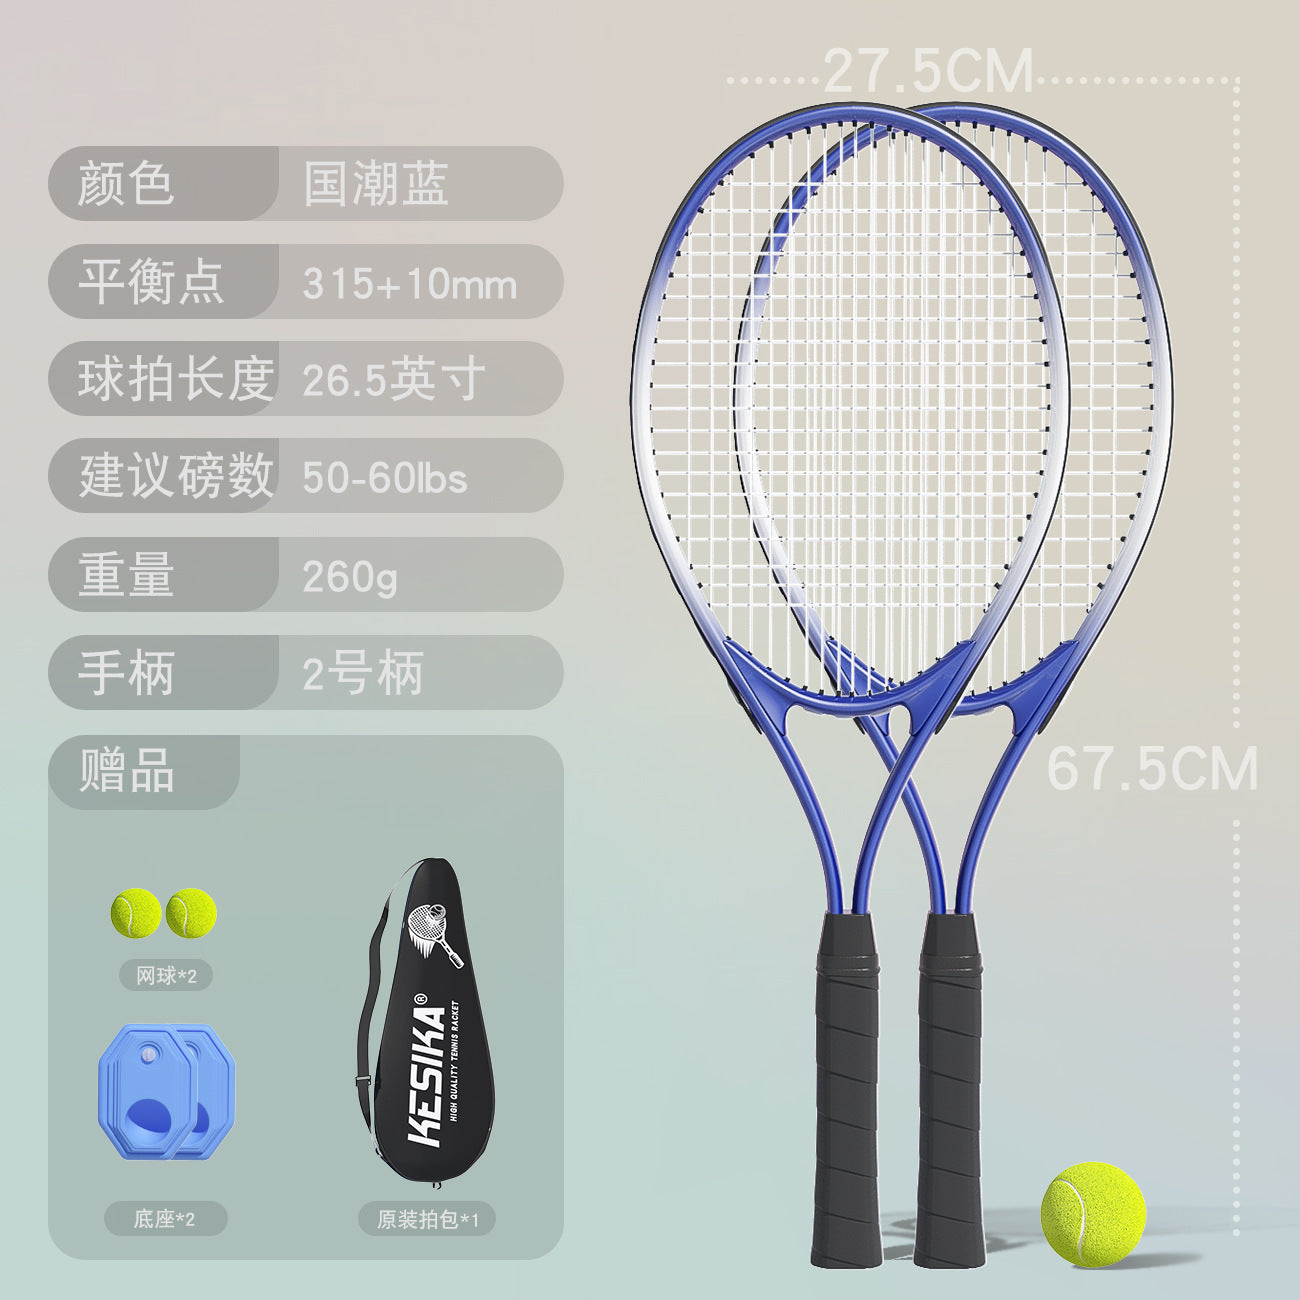 Male And Female Adult With String Rebounding Tennis Racquet Singles